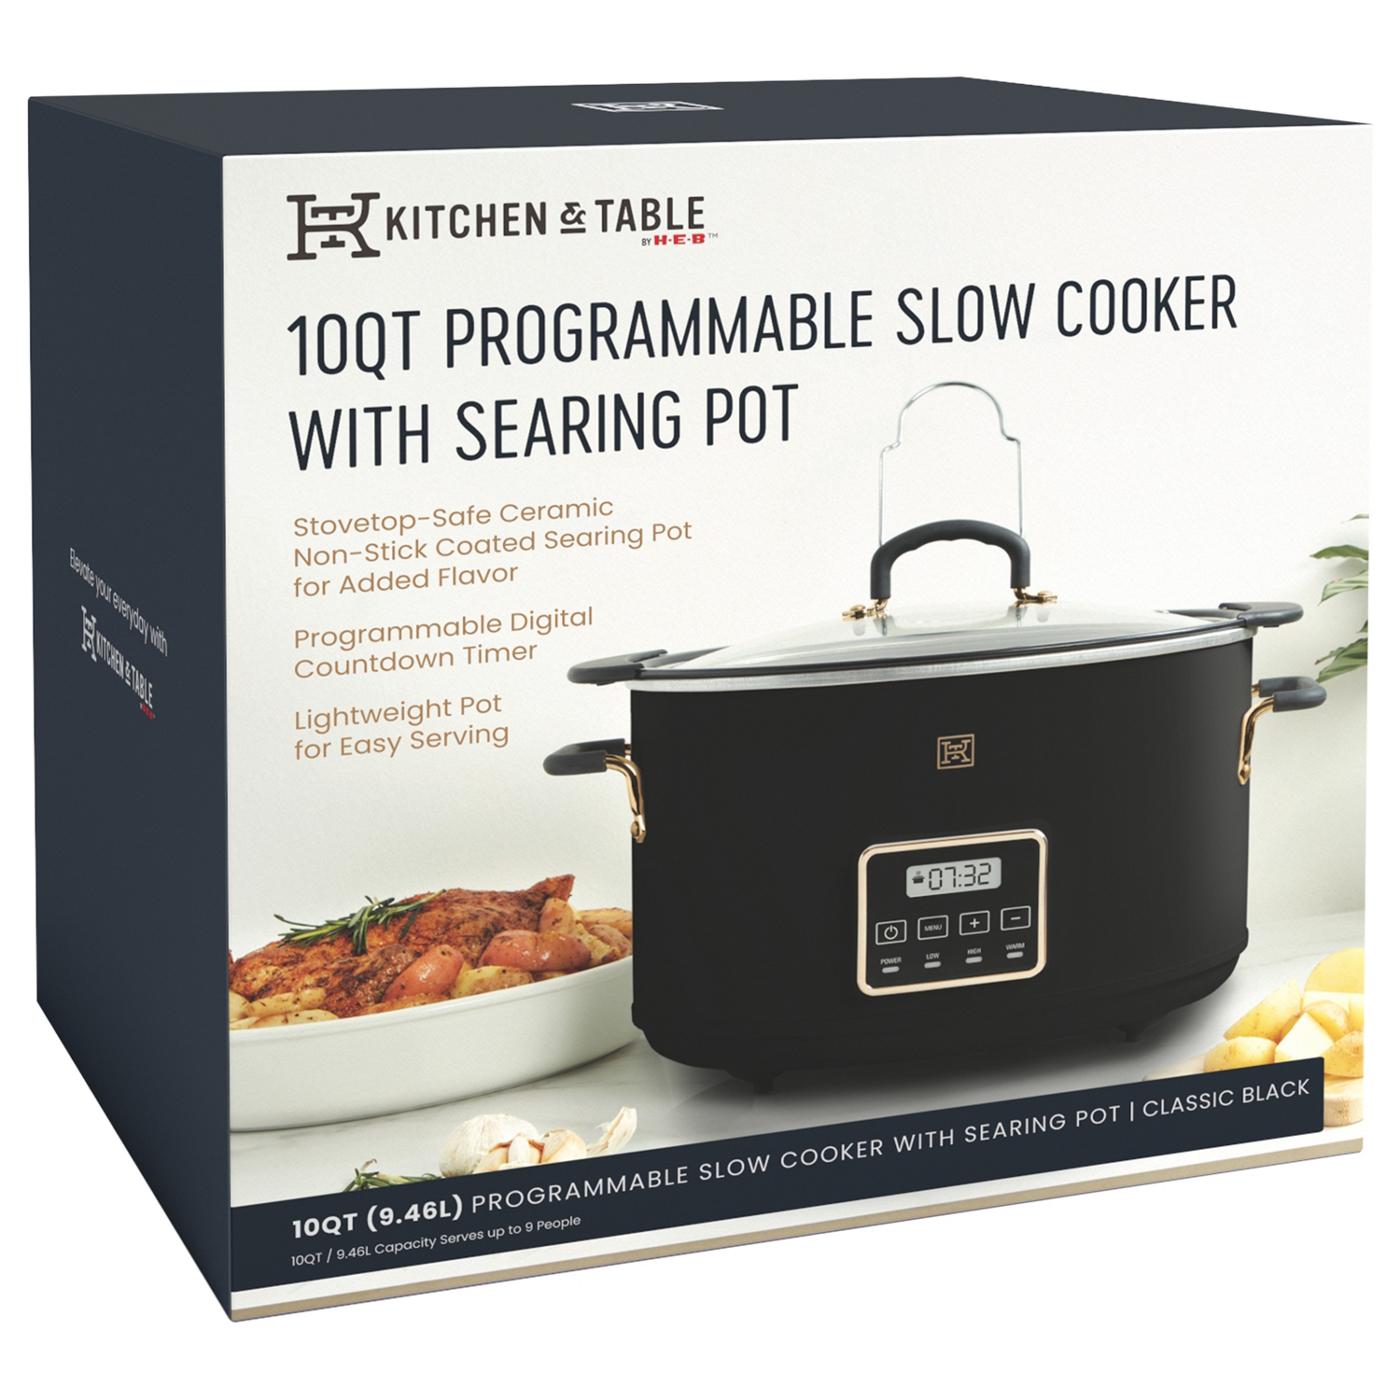 Kitchen & Table by H-E-B Programmable Slow Cooker with Searing Pot - Classic Black; image 5 of 7